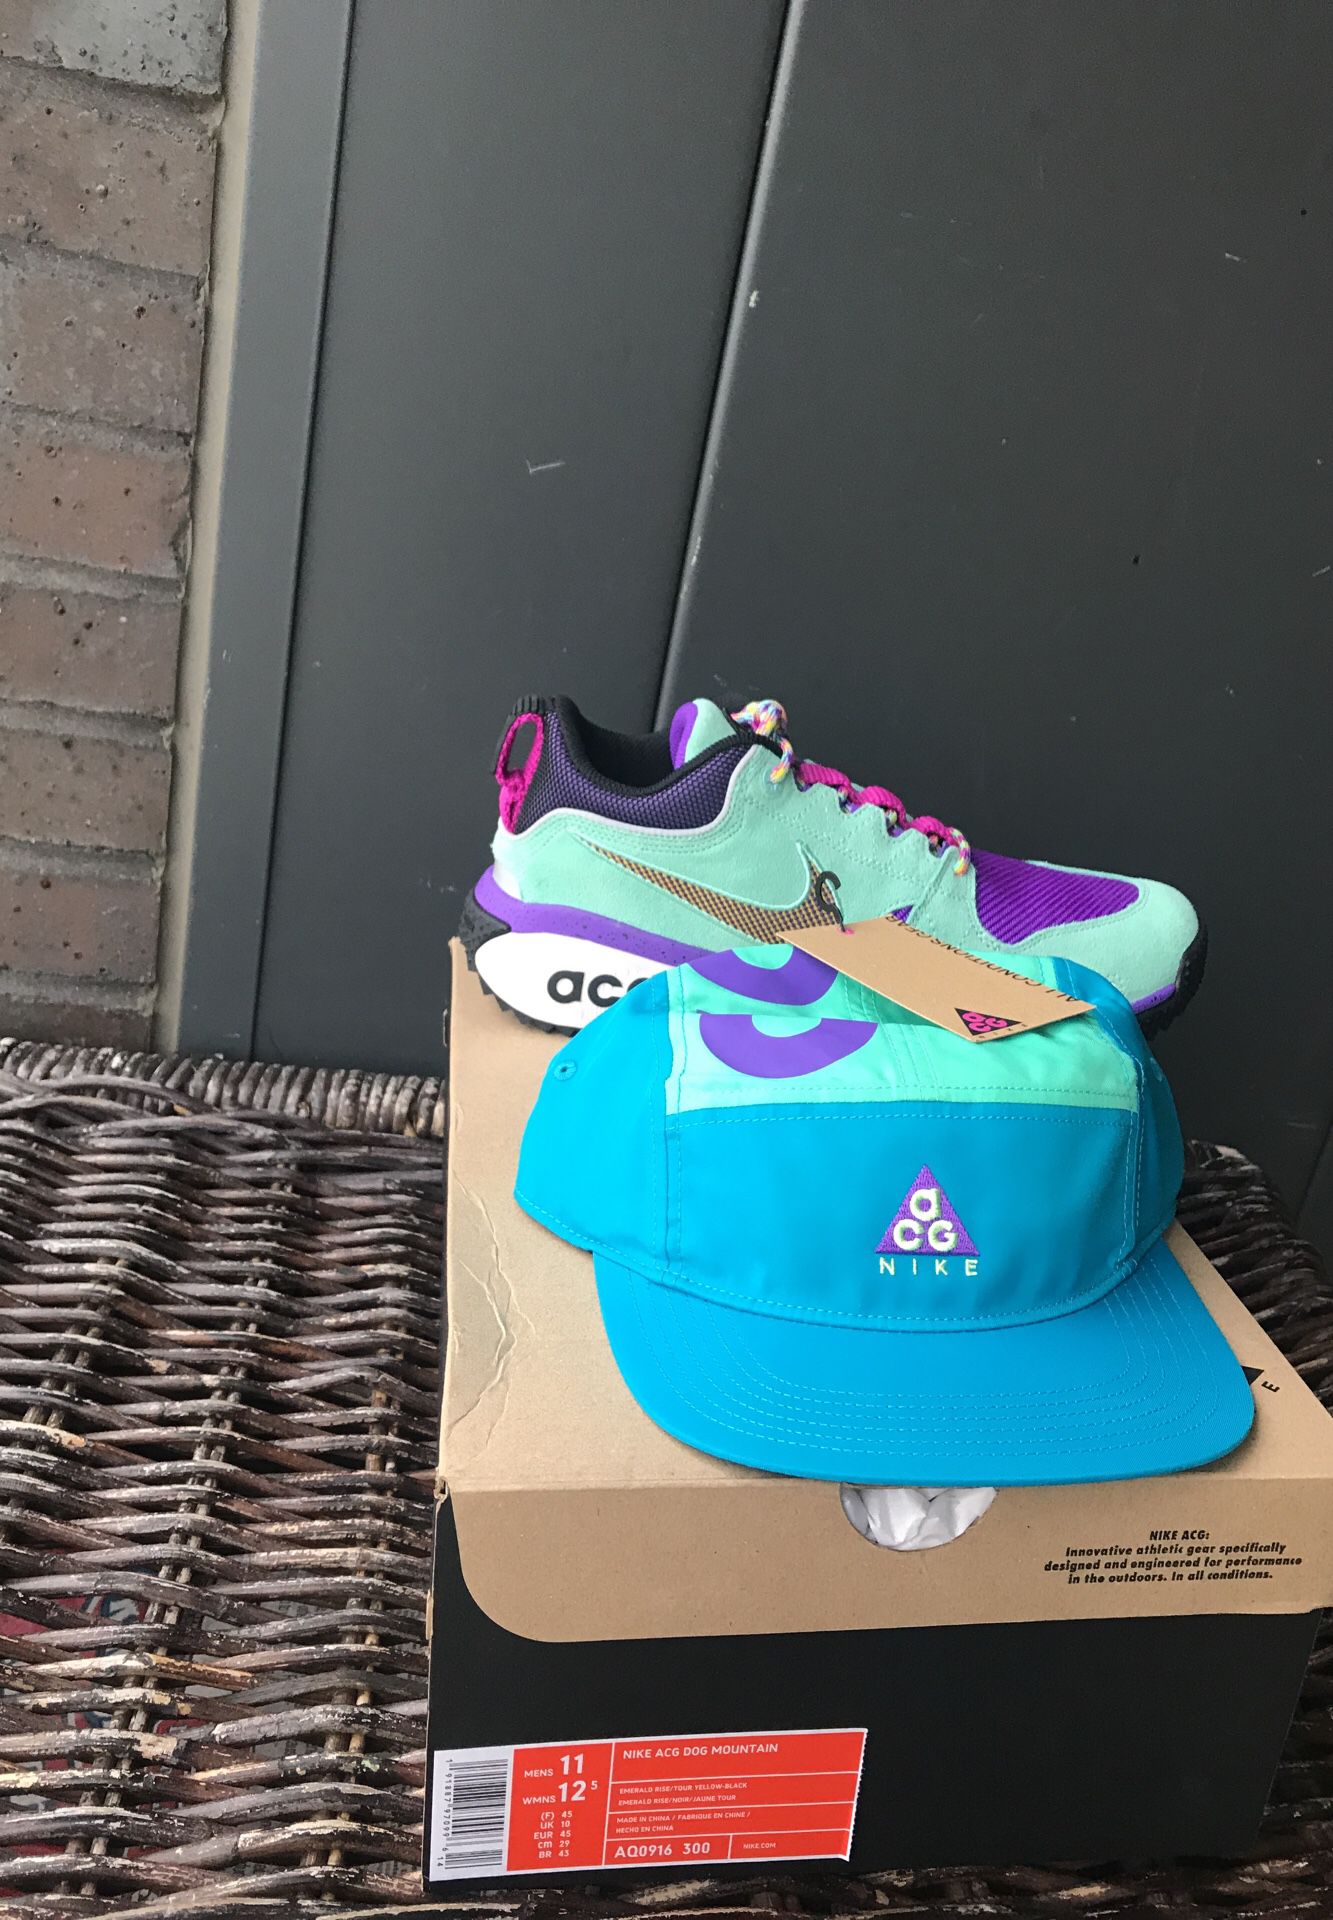 Nike Lab ACG Dog Mountain boots and Nike Lab ACG 84 five panel running cap (VERY RARE LIMITED EDITION)